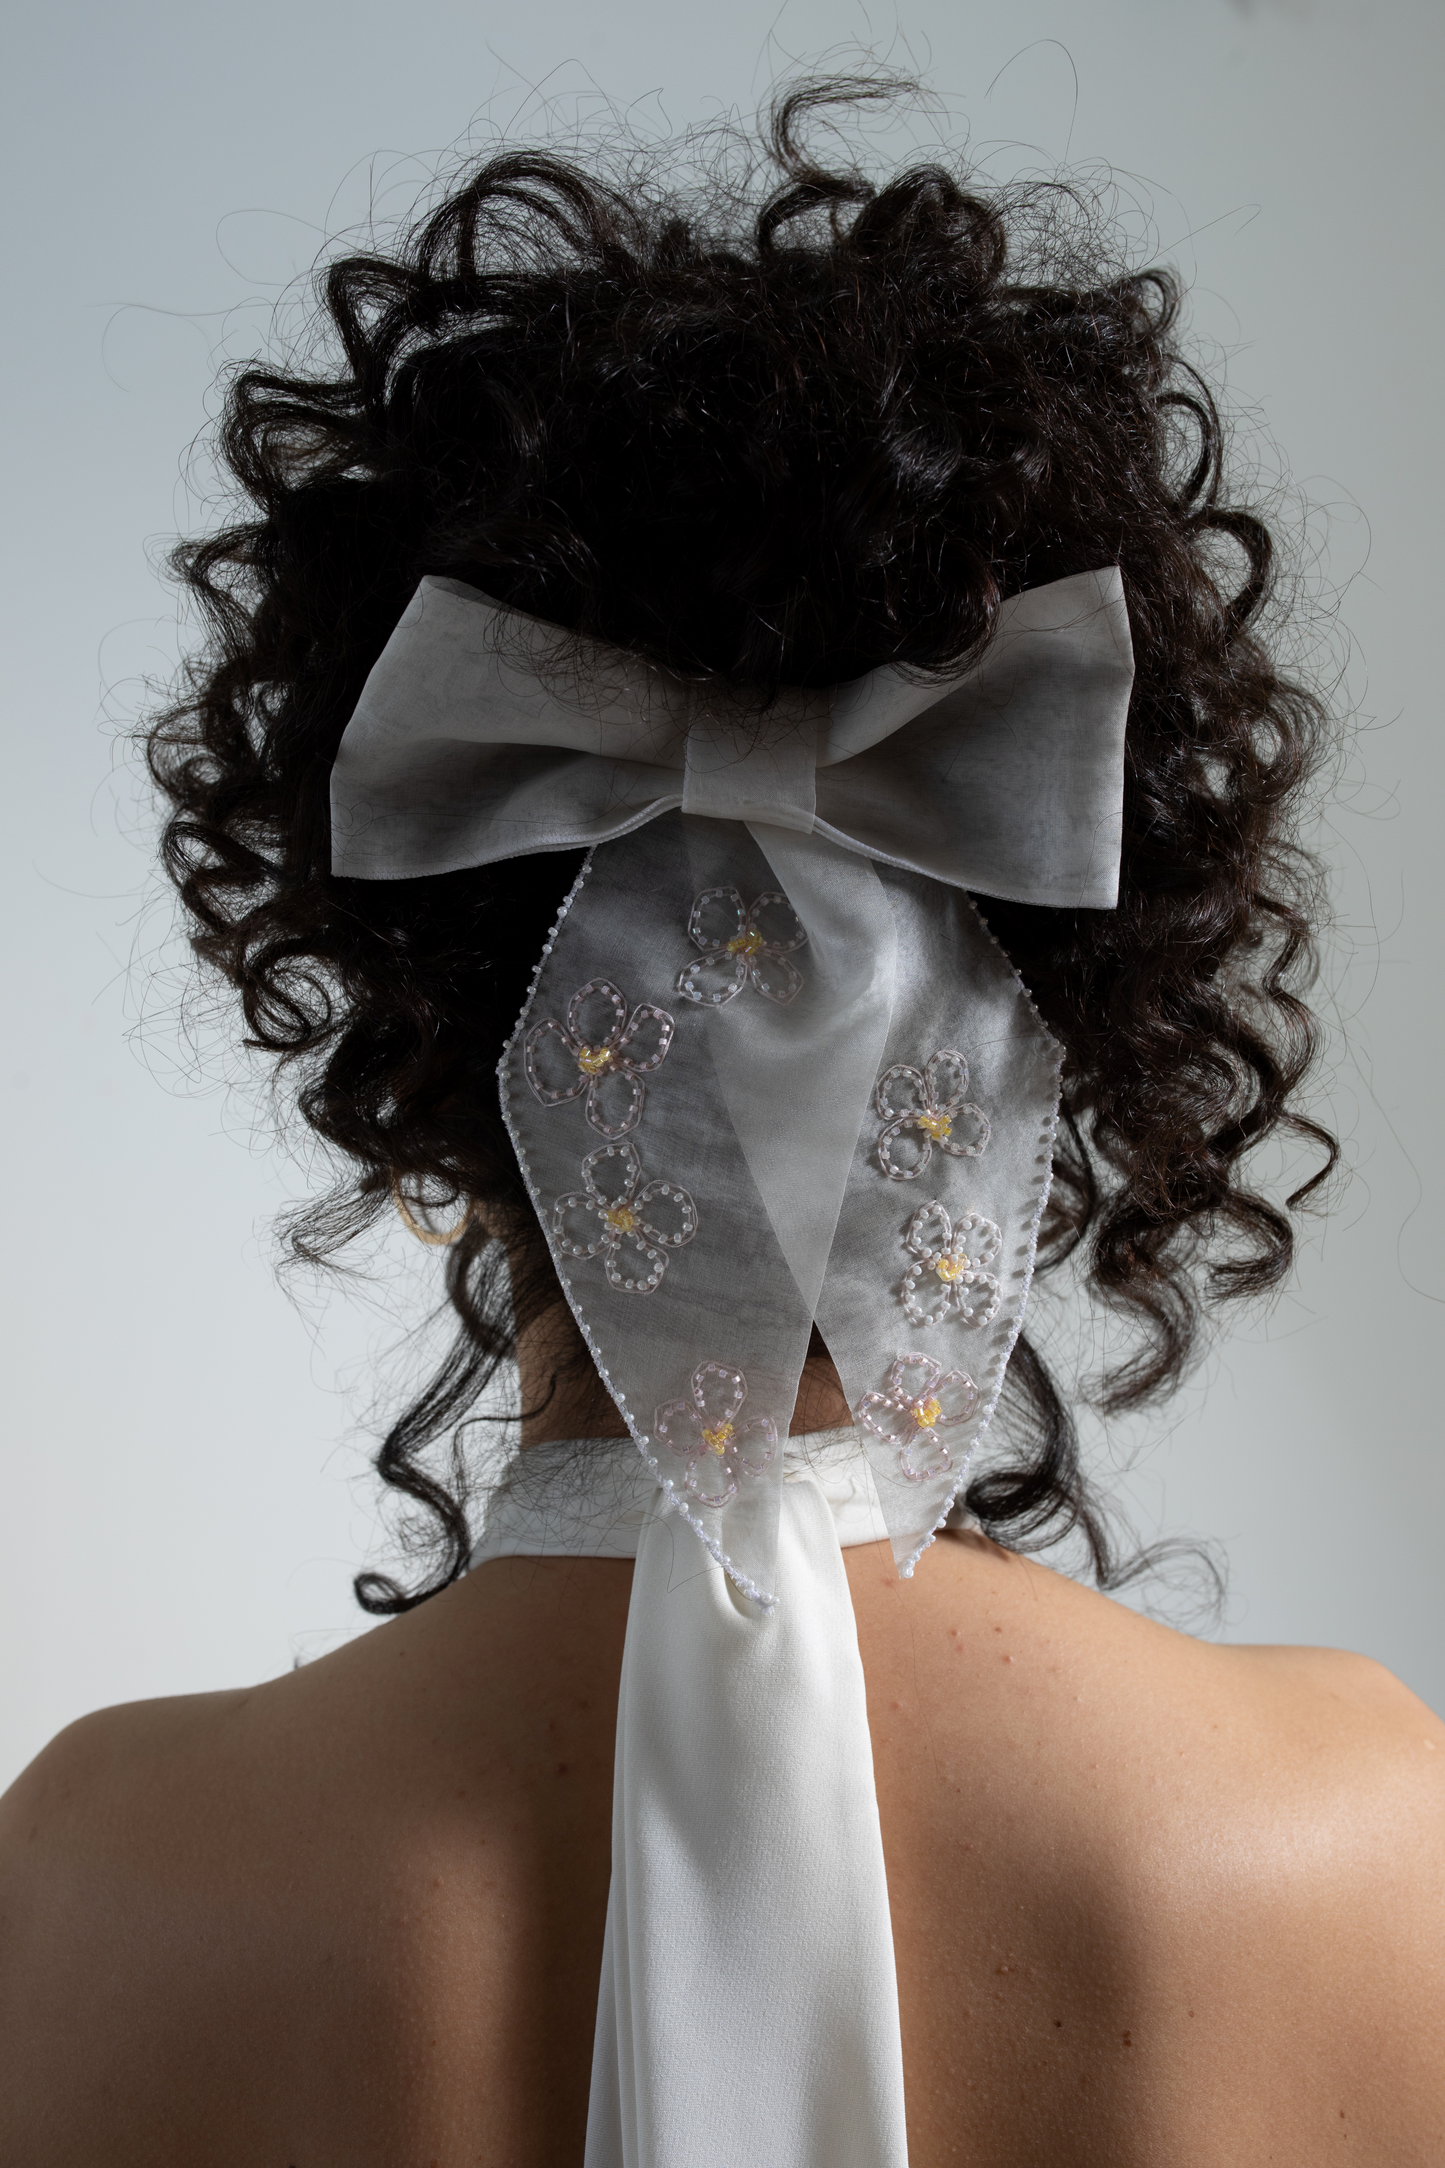 Silk organza bridal bow, delicately hand-embroidered with beaded blossom flowers.  This decorative hair bow is part of a collection of embellished luxury bridal accessories and bridal headwear.